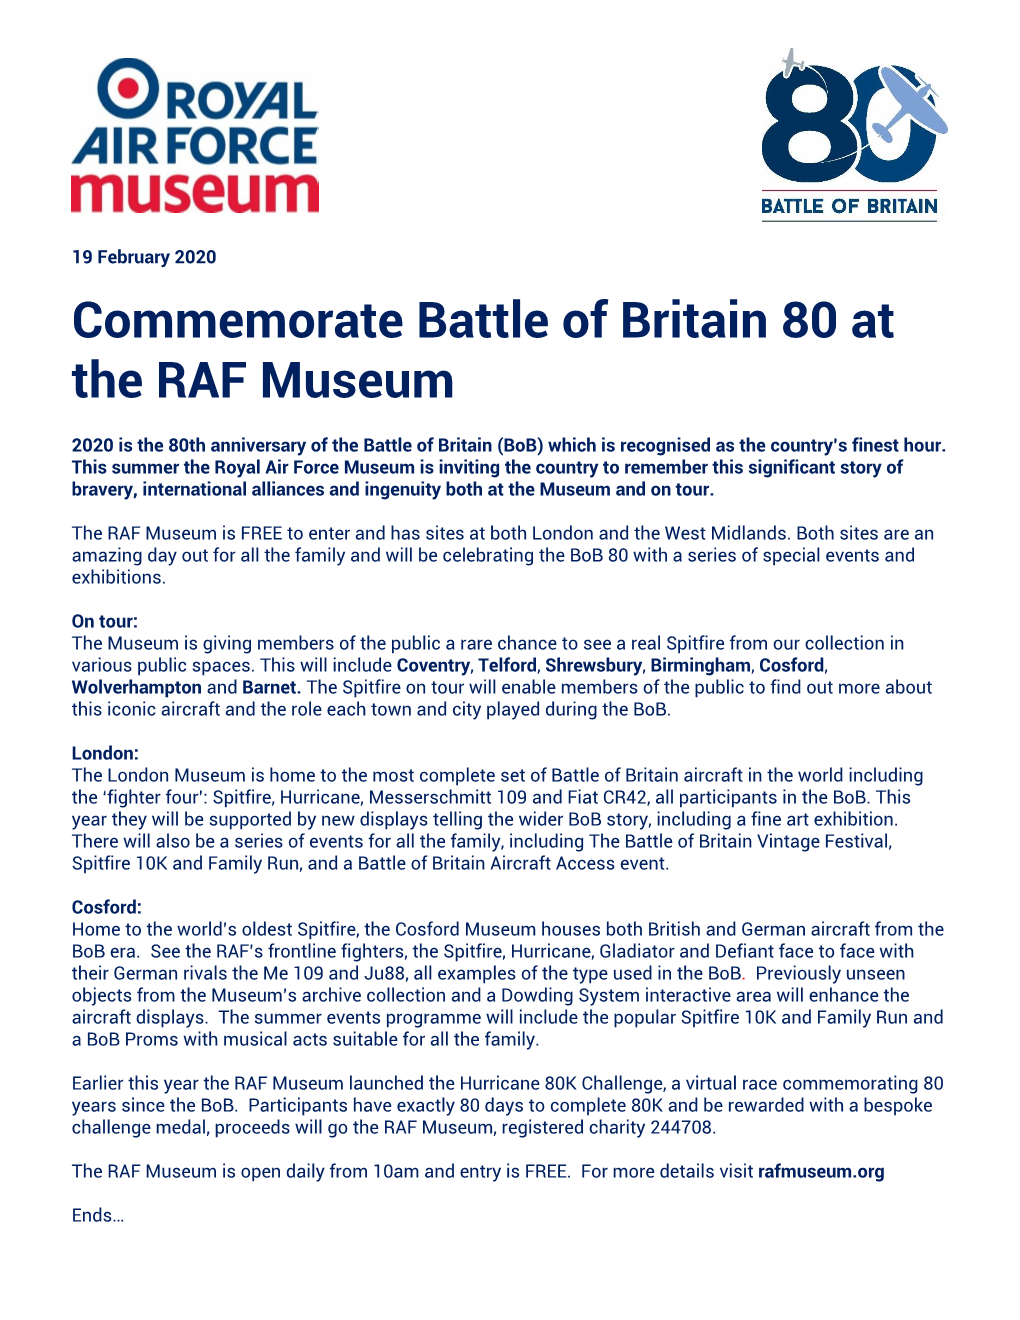 Commemorate Battle of Britain 80 at the RAF Museum